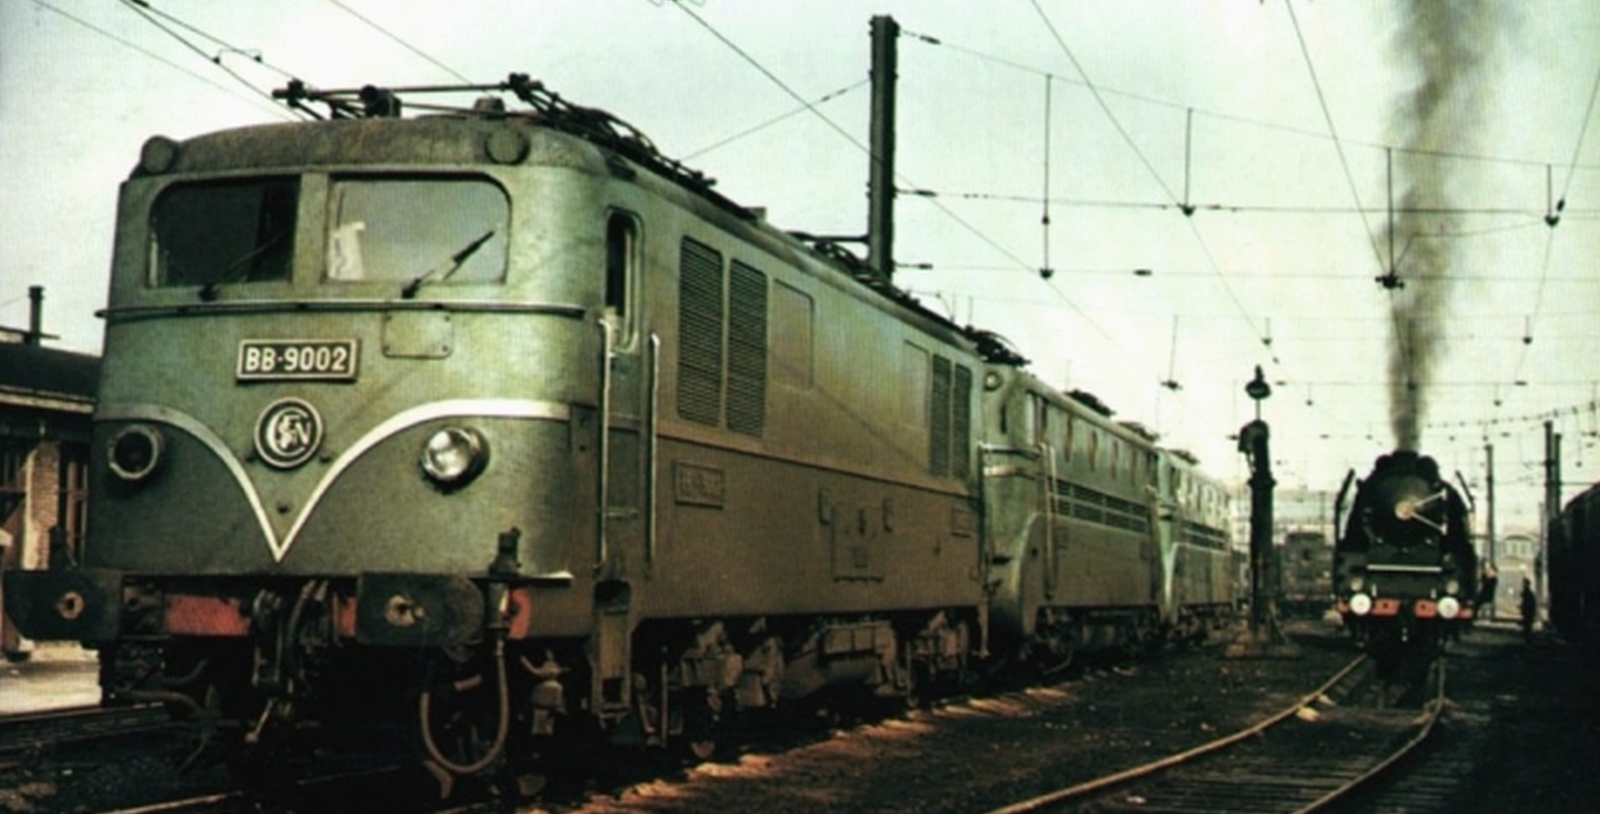 BB 9002 in October 1964 in front of BB 9003 and 9004